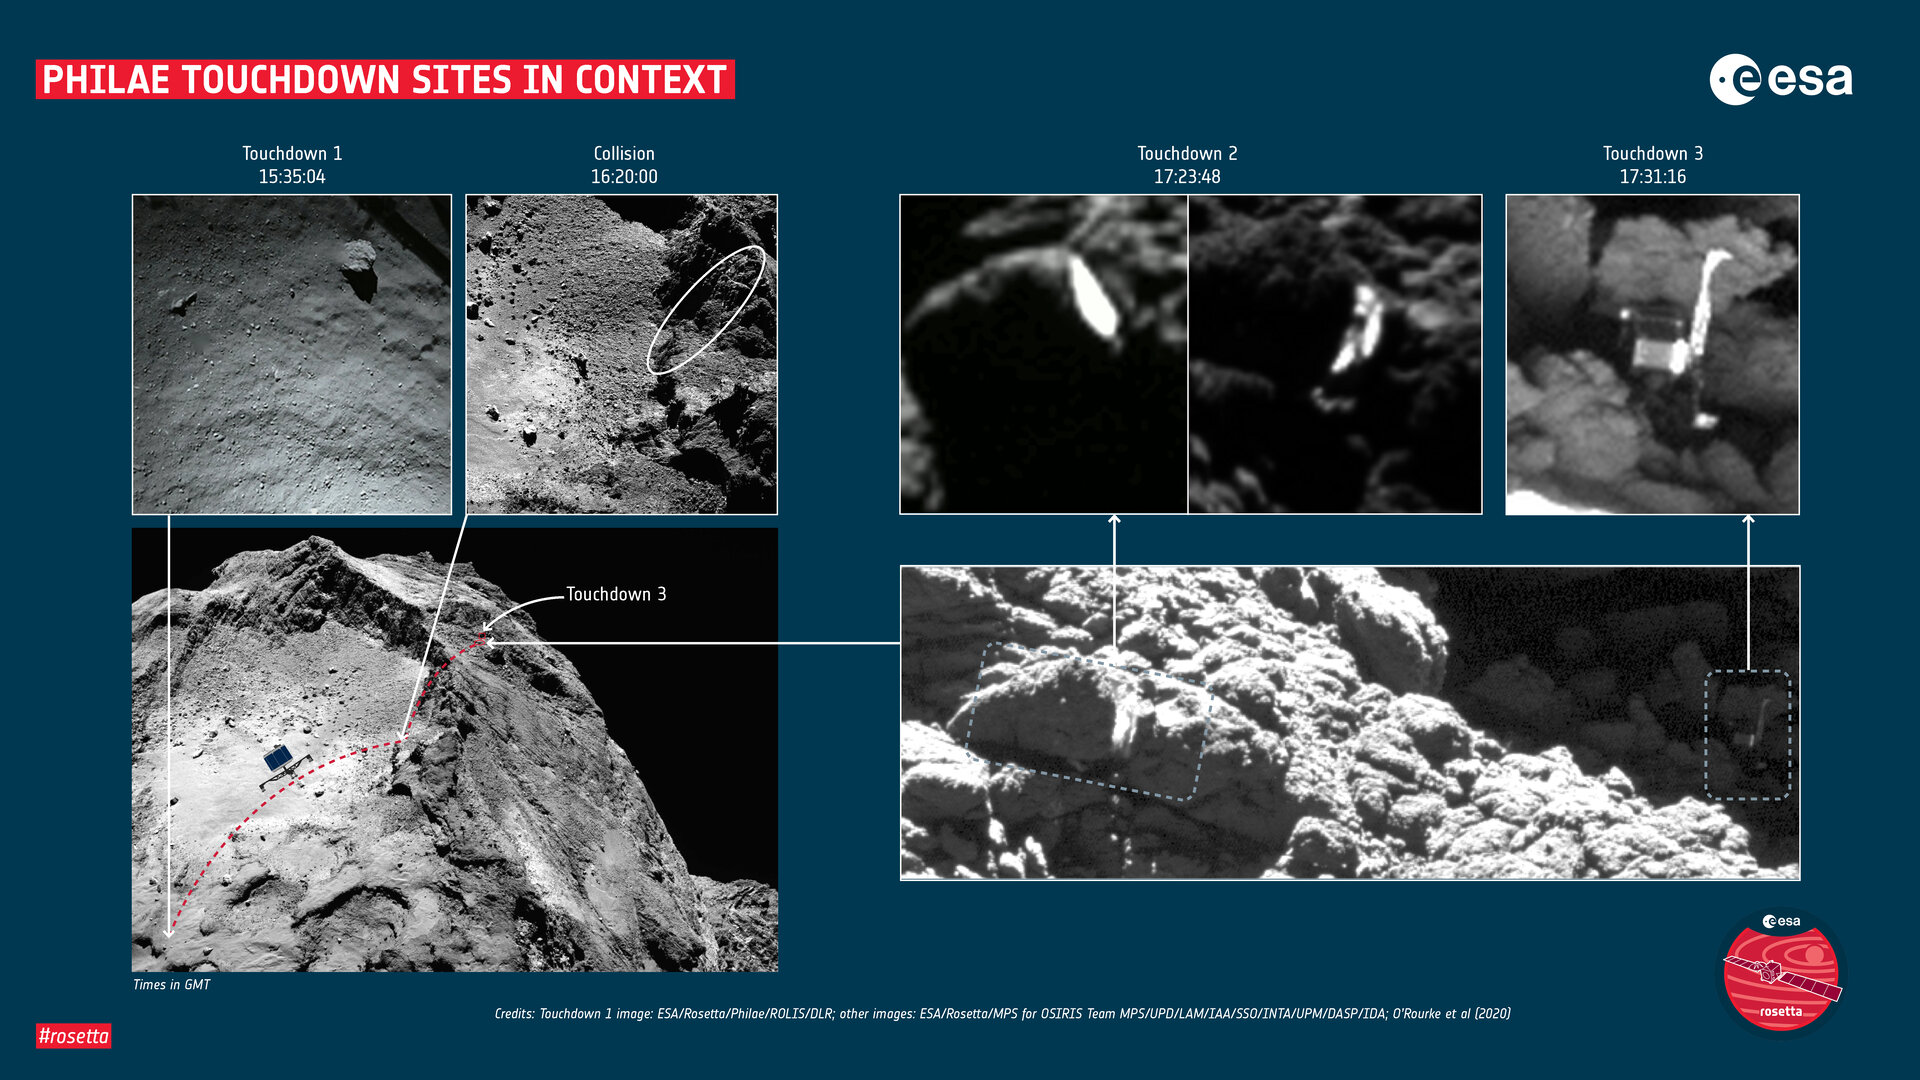 Philae touchdown sites in context